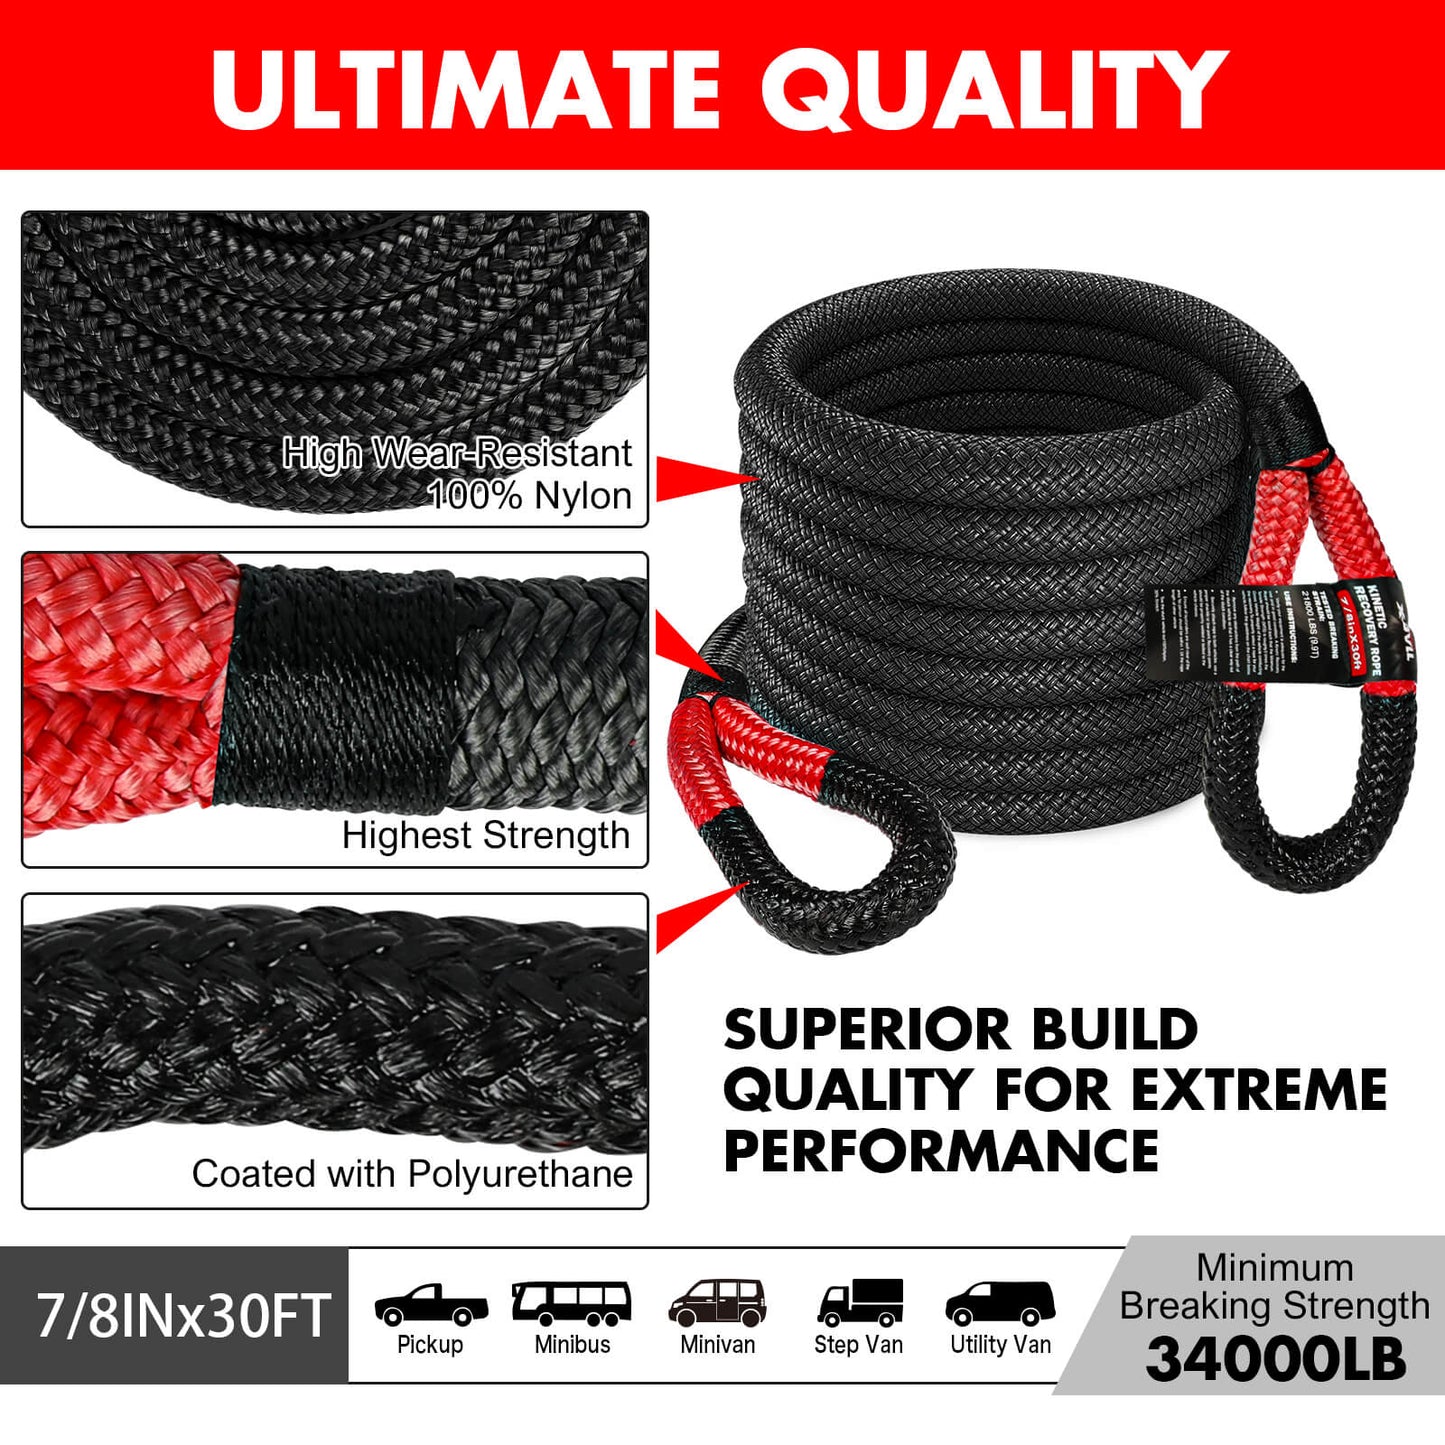 X-BULL 4WD Recovery Kit 15PCS Winch Recovery track Kinetic Rope Snatch Strap 4X4